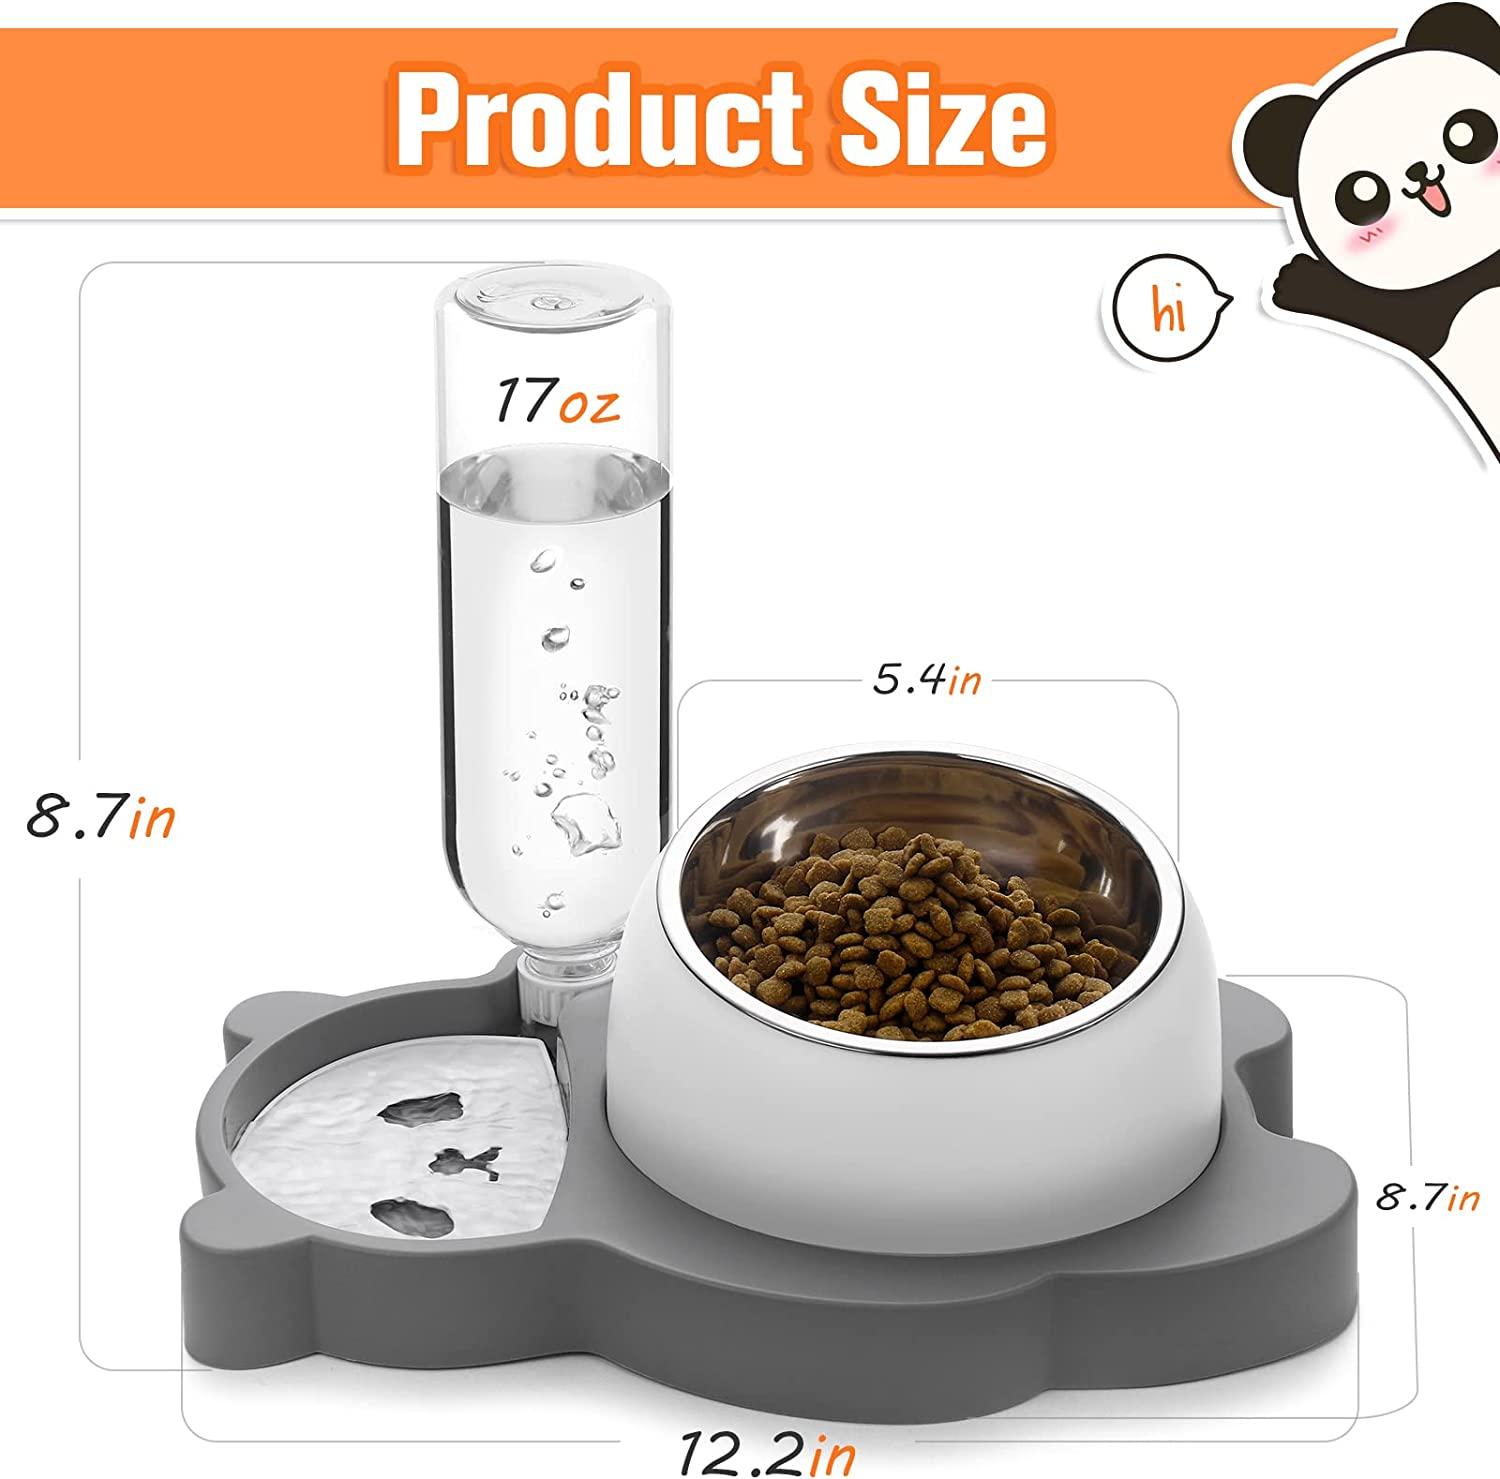 DIY Raised Pet Feeding Station: a Nice Gift for Naughty Pets